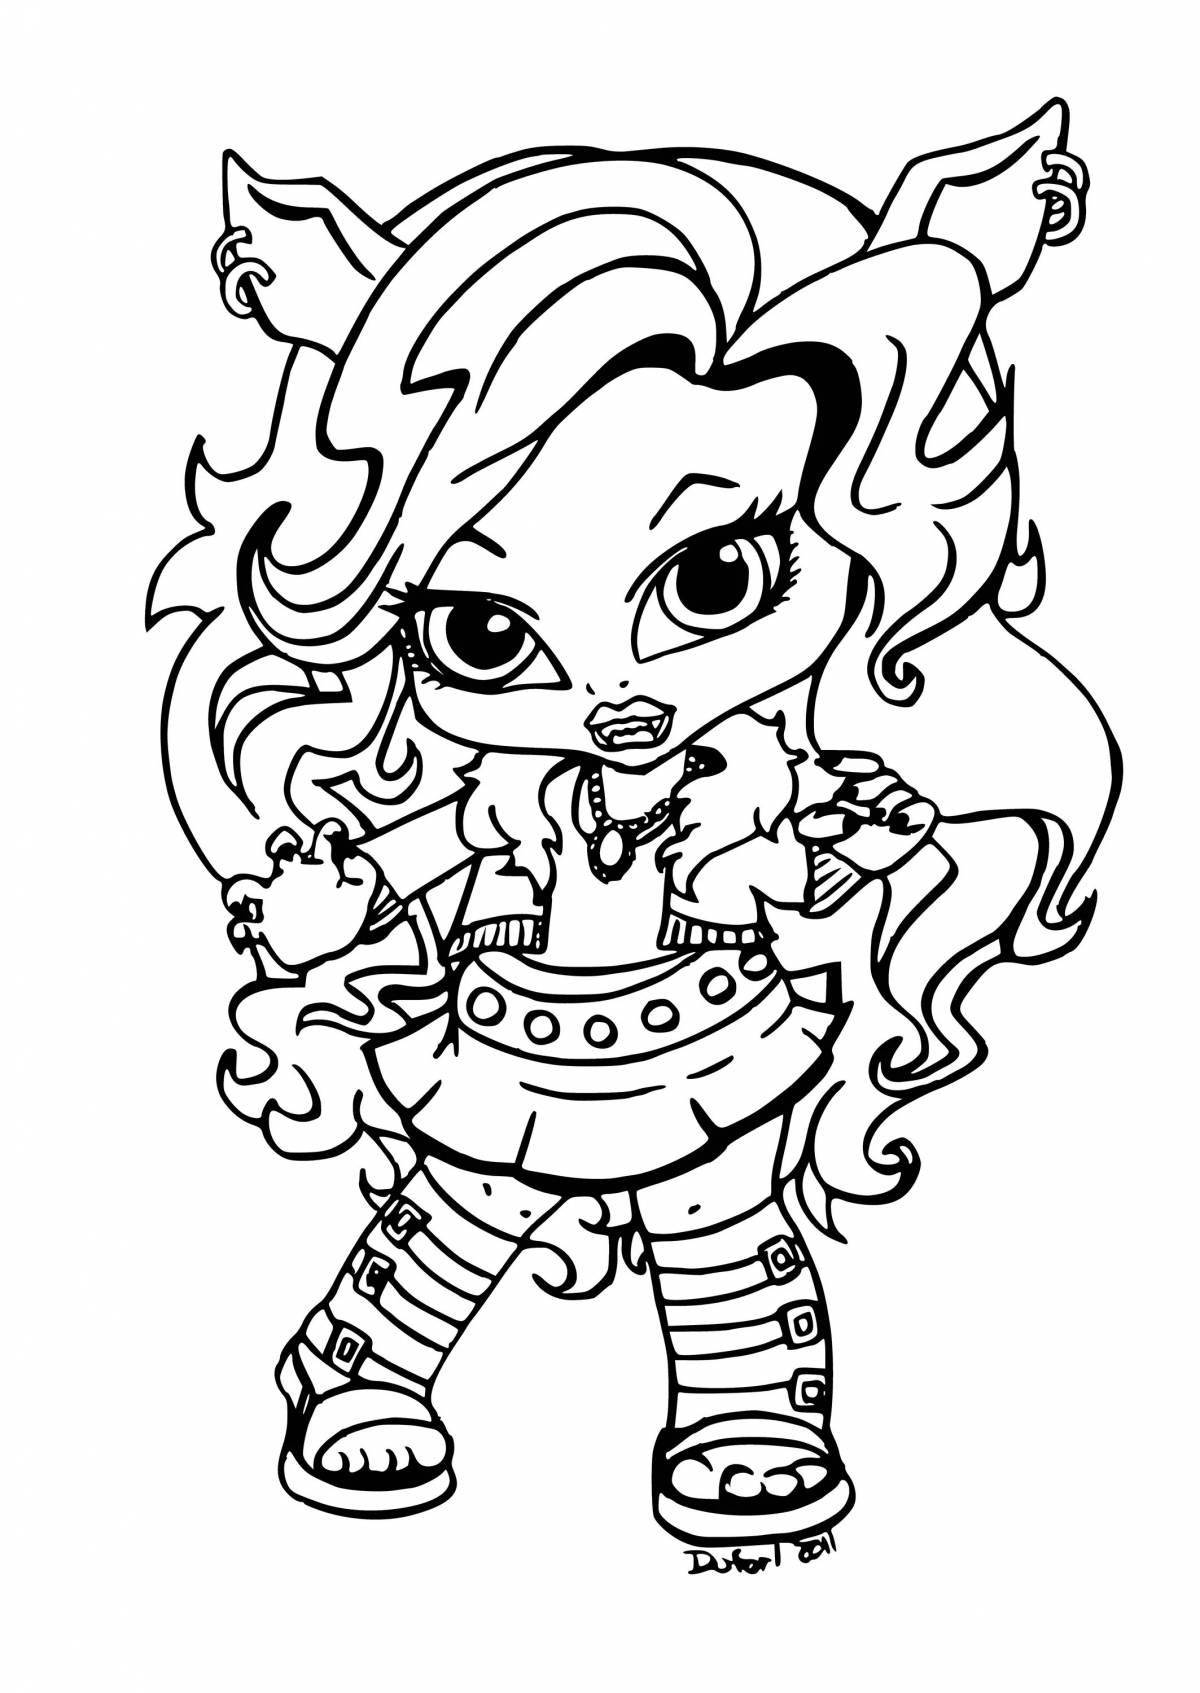 Adorable cave club doll coloring book